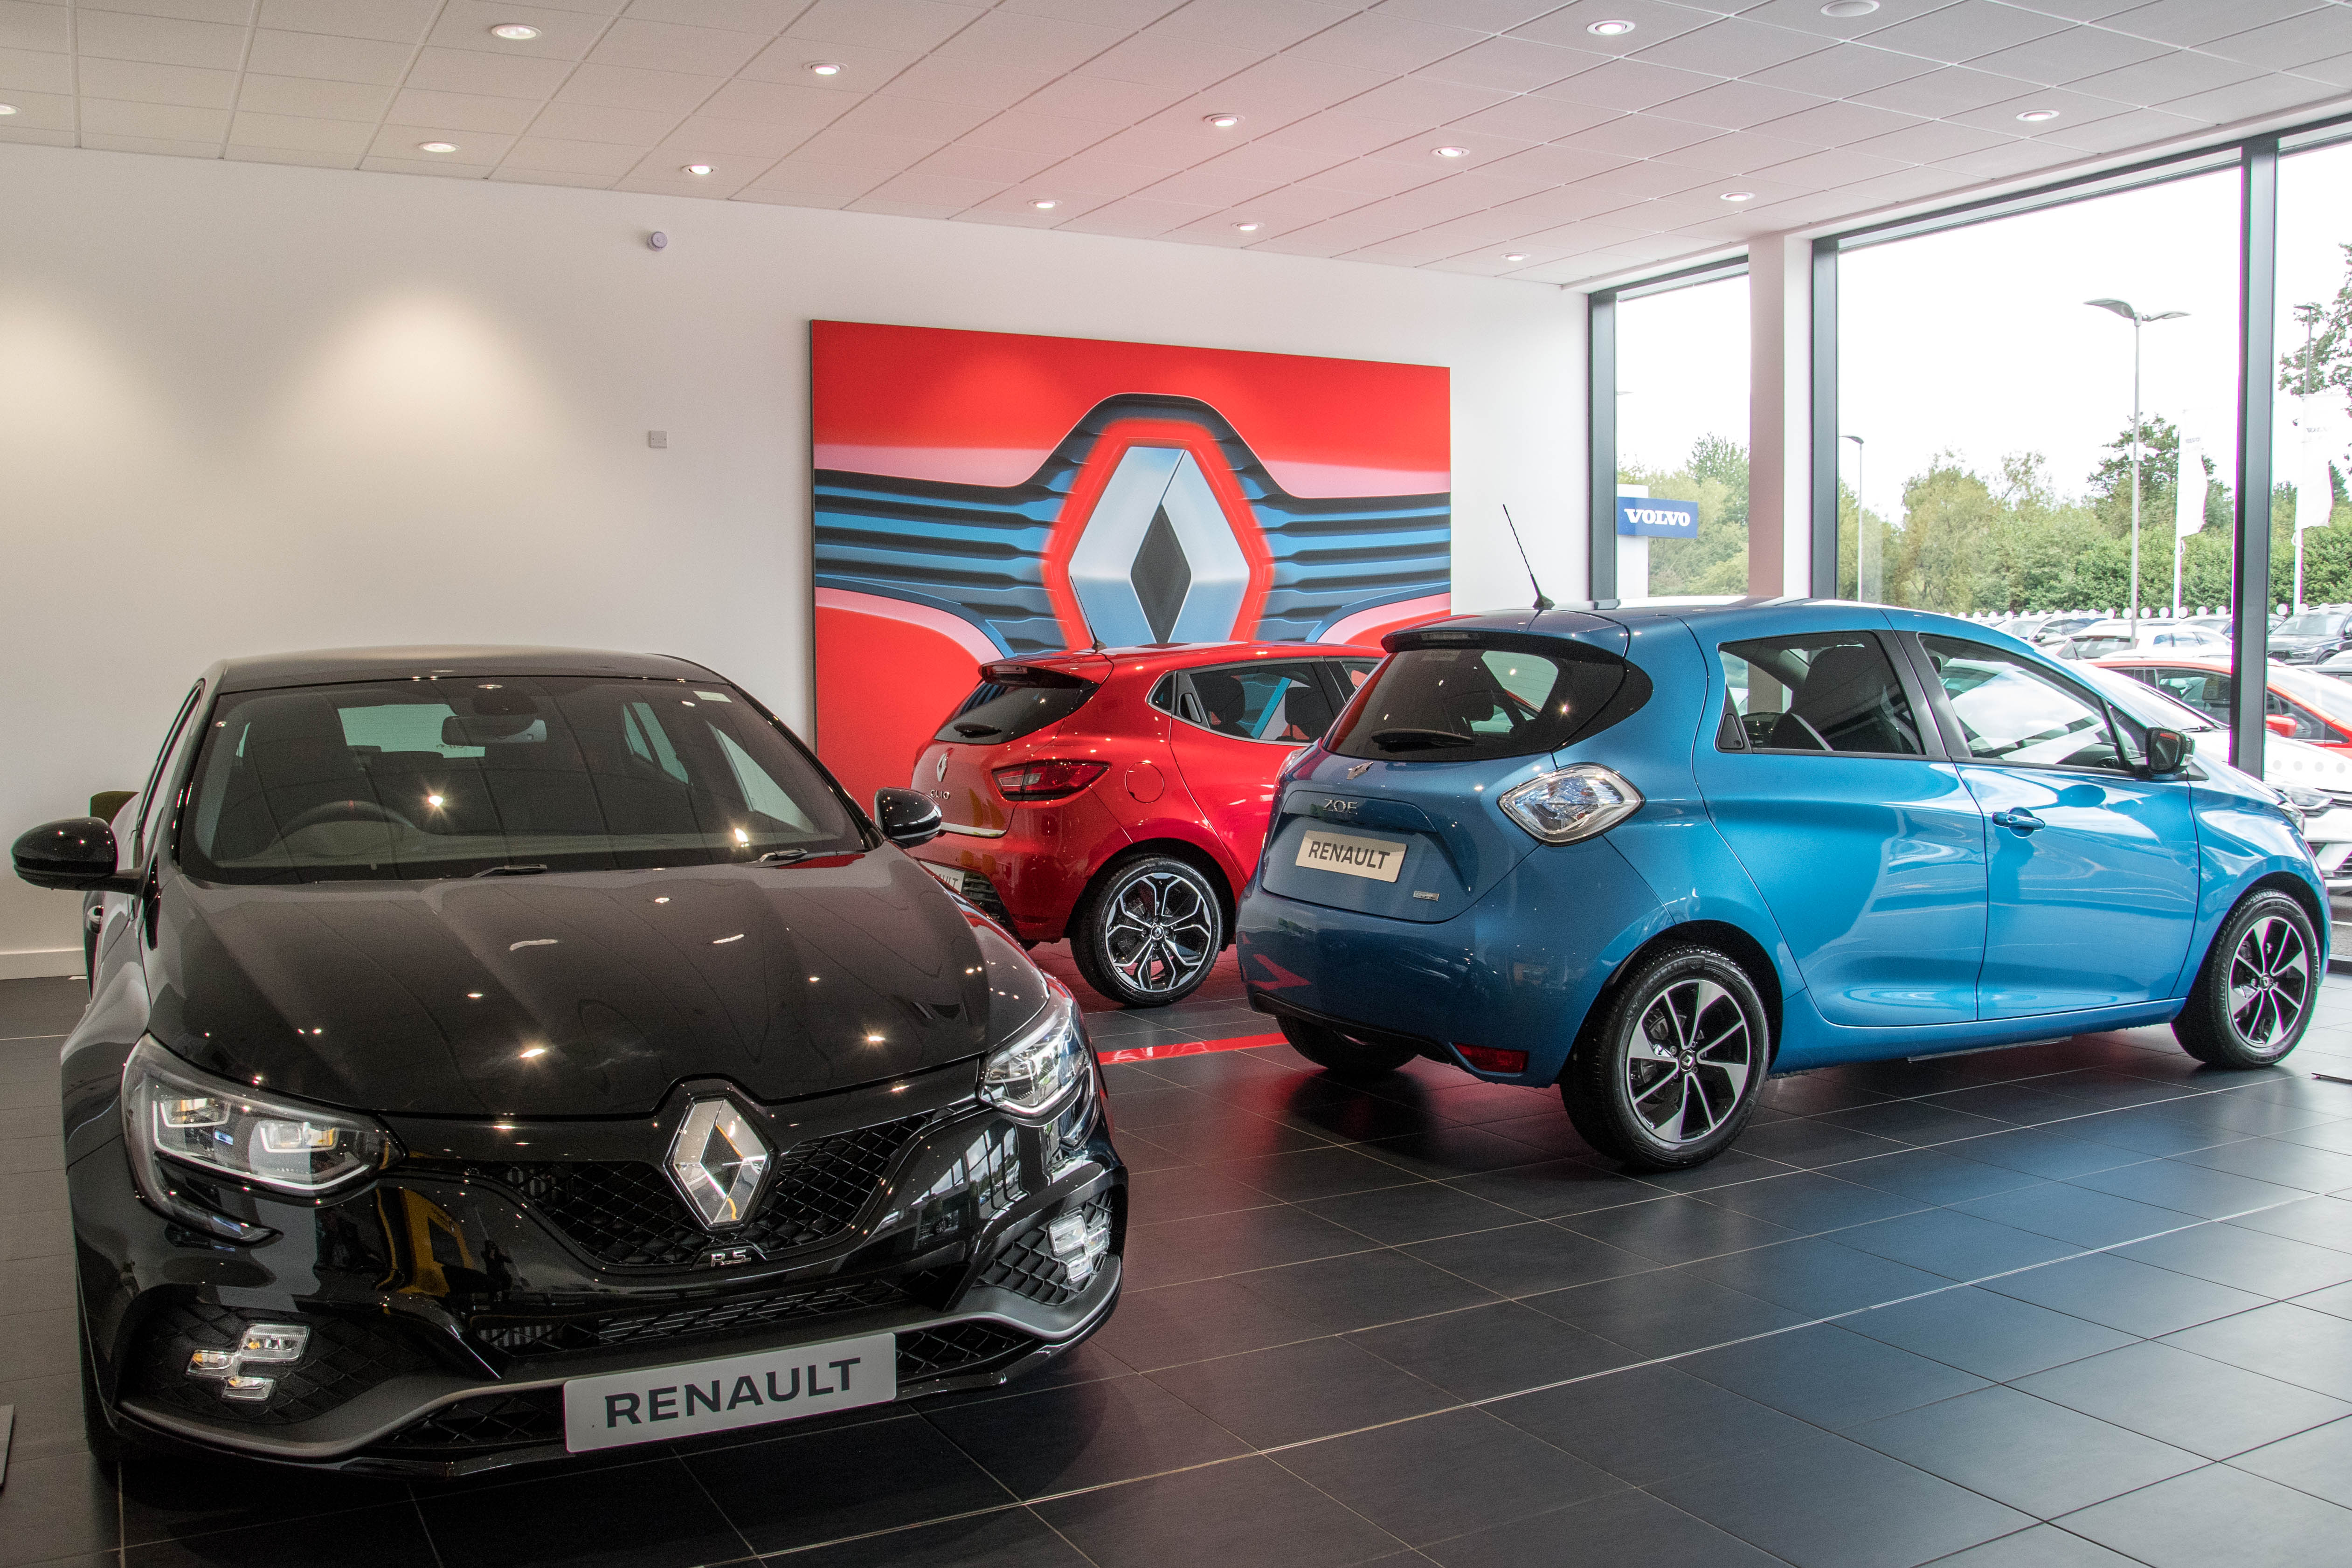 Images Renault Chesterfield